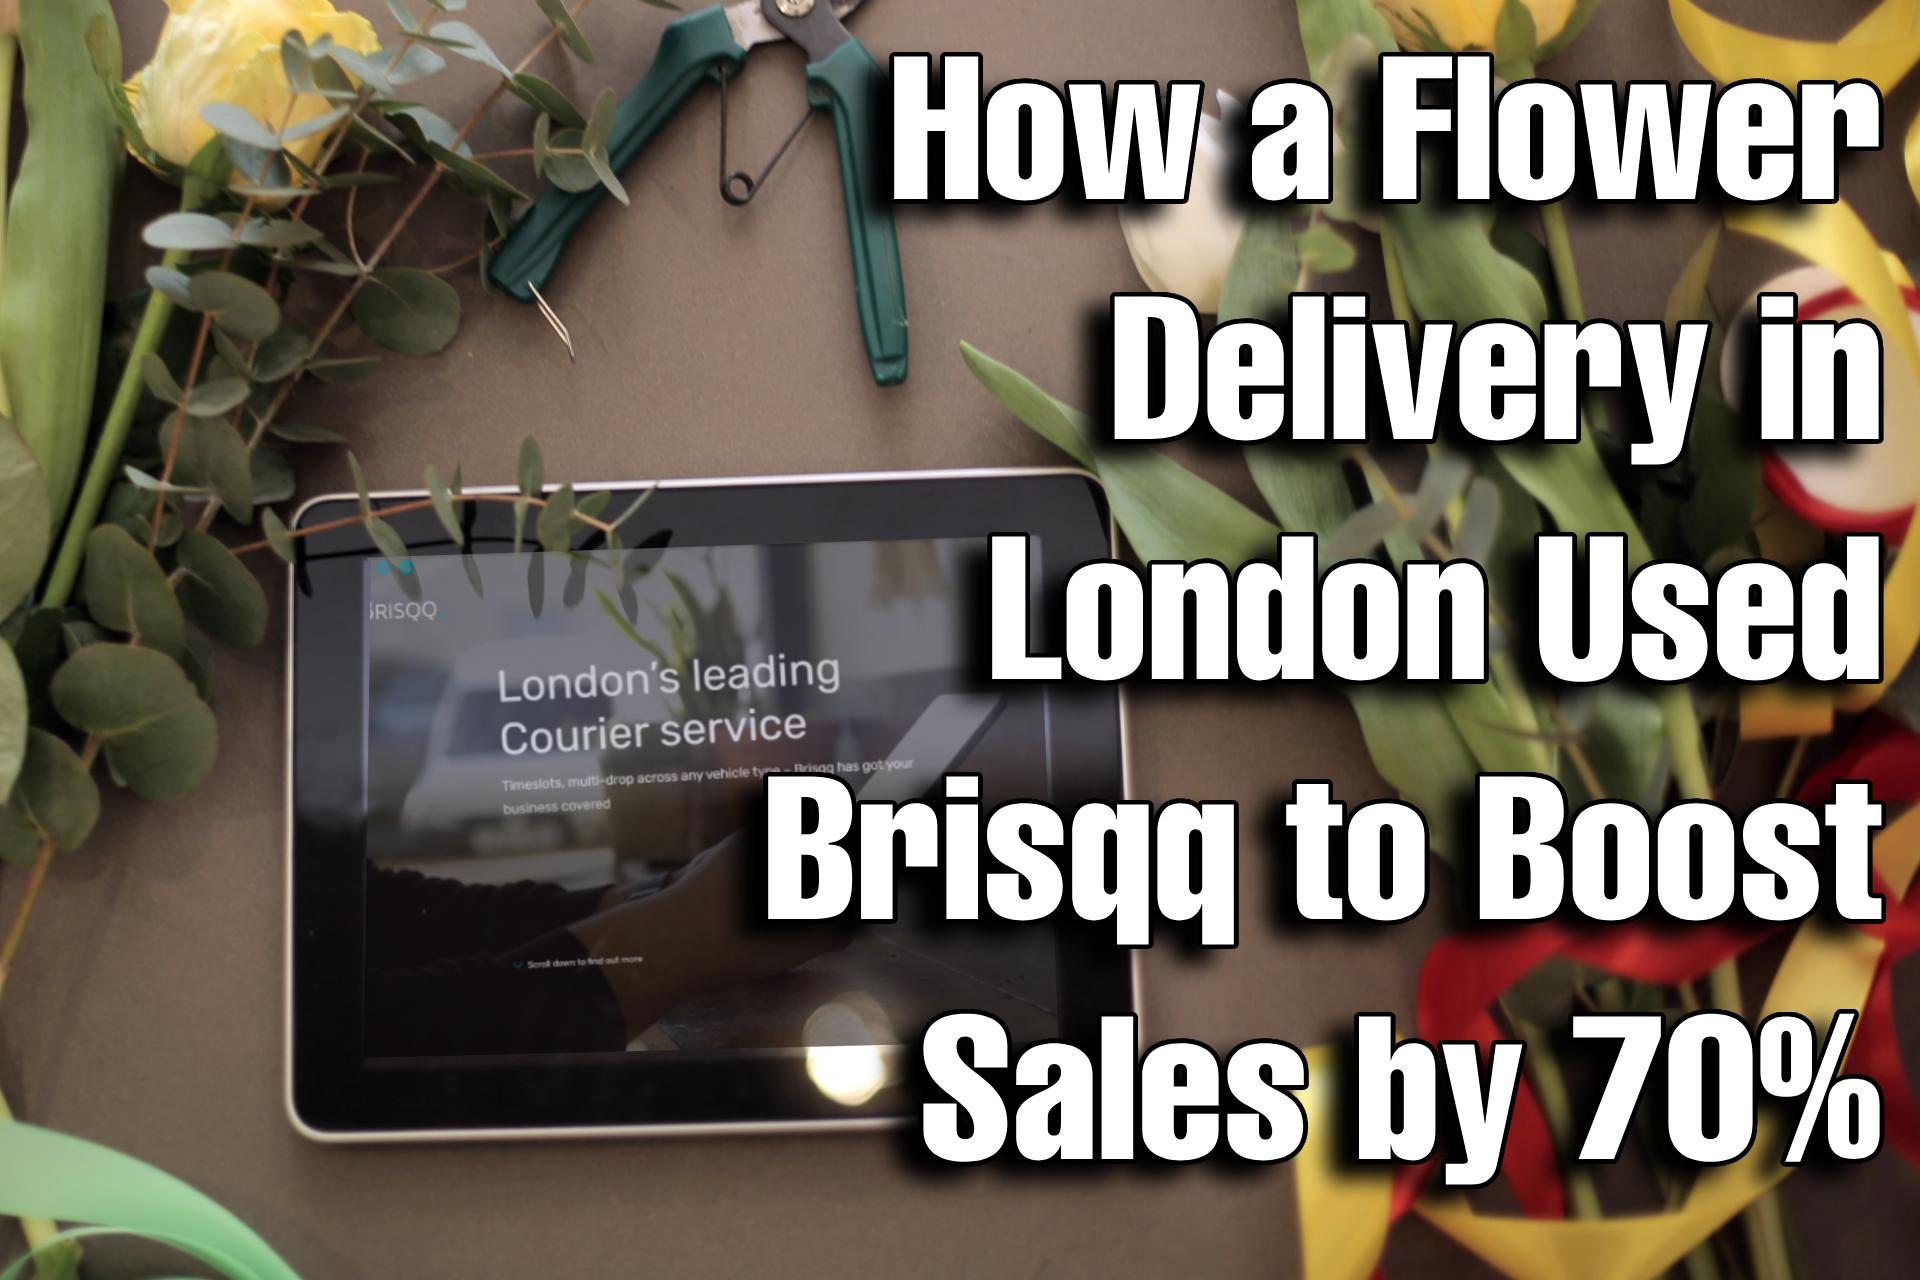 How a Flower Delivery in London Used Brisqq to Boost Sales by 70%